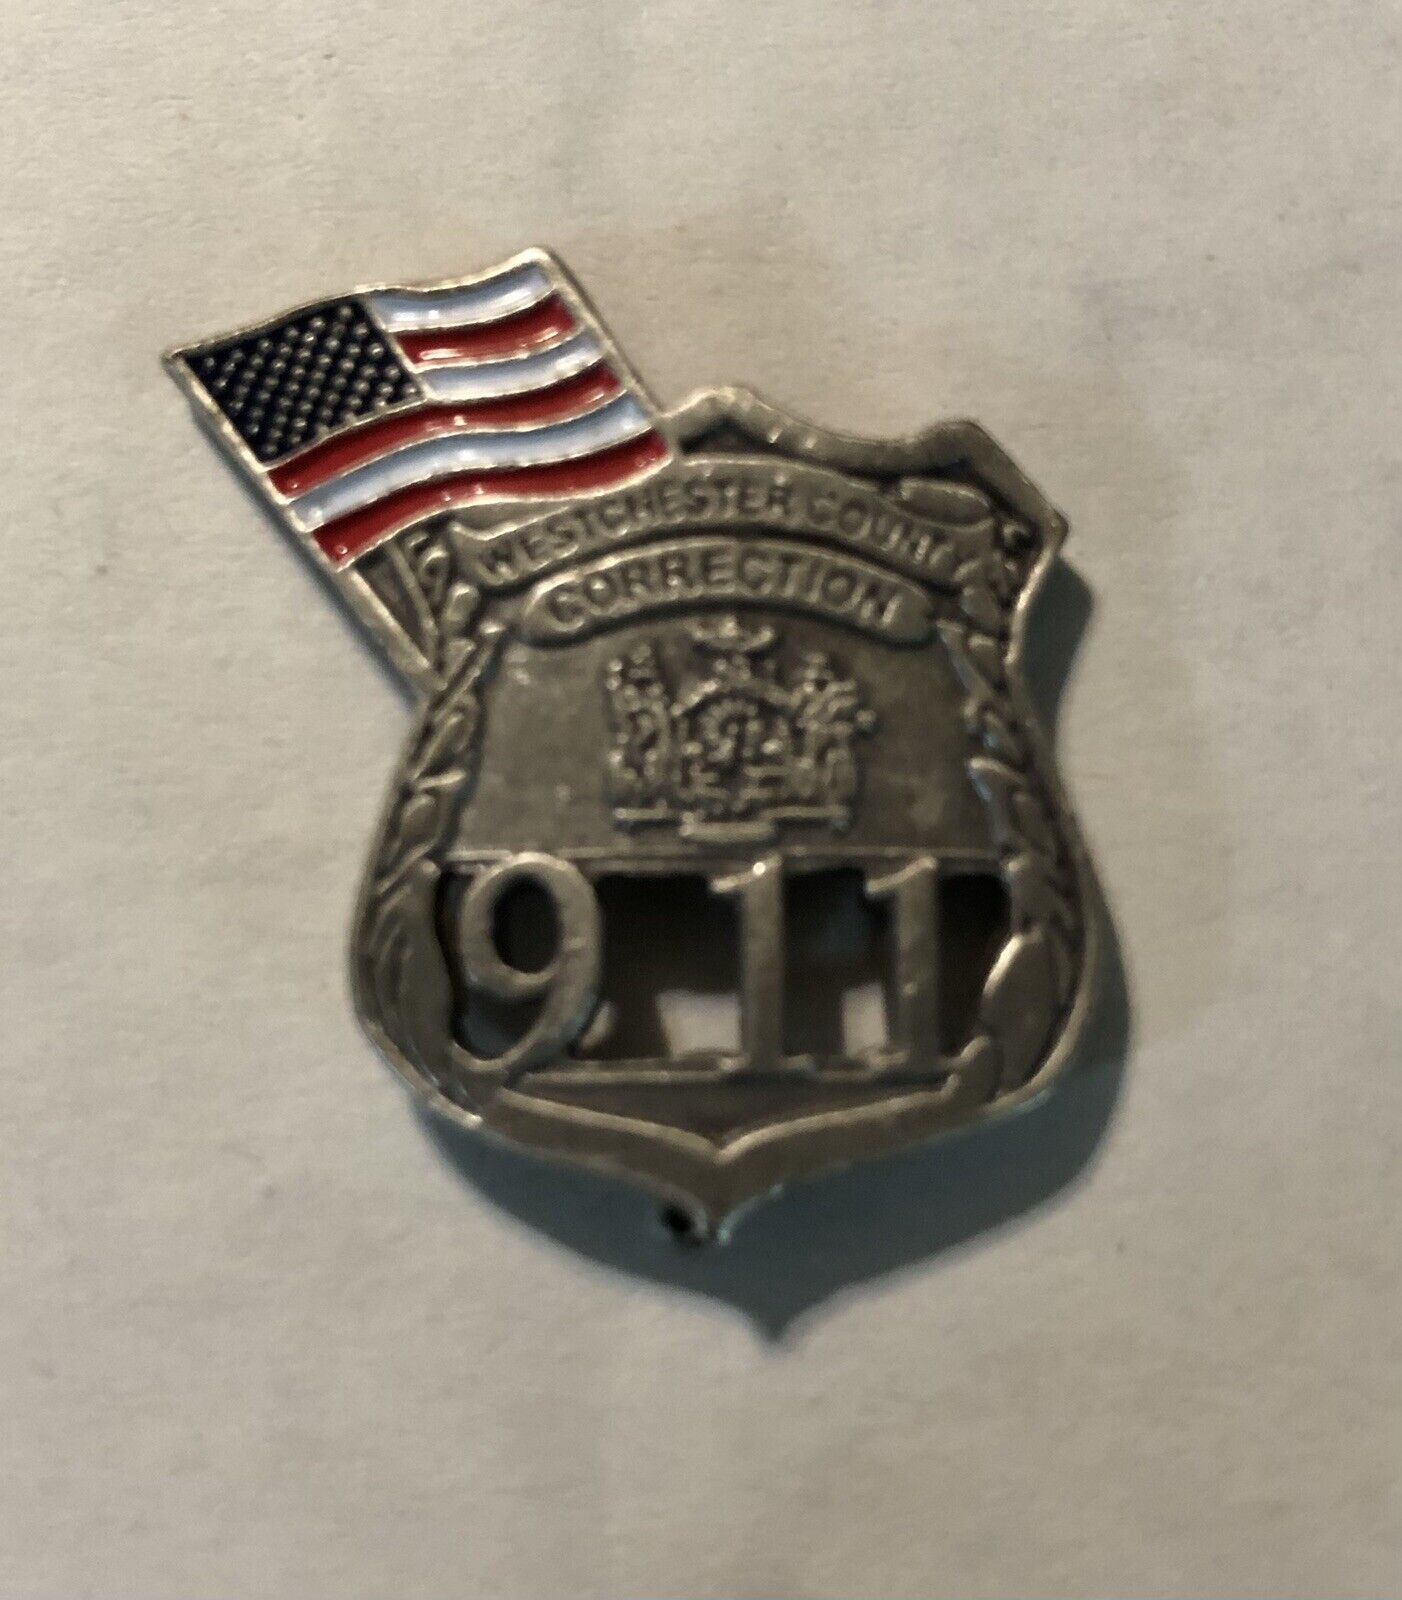 Westchester County Correction 9/11 Pin